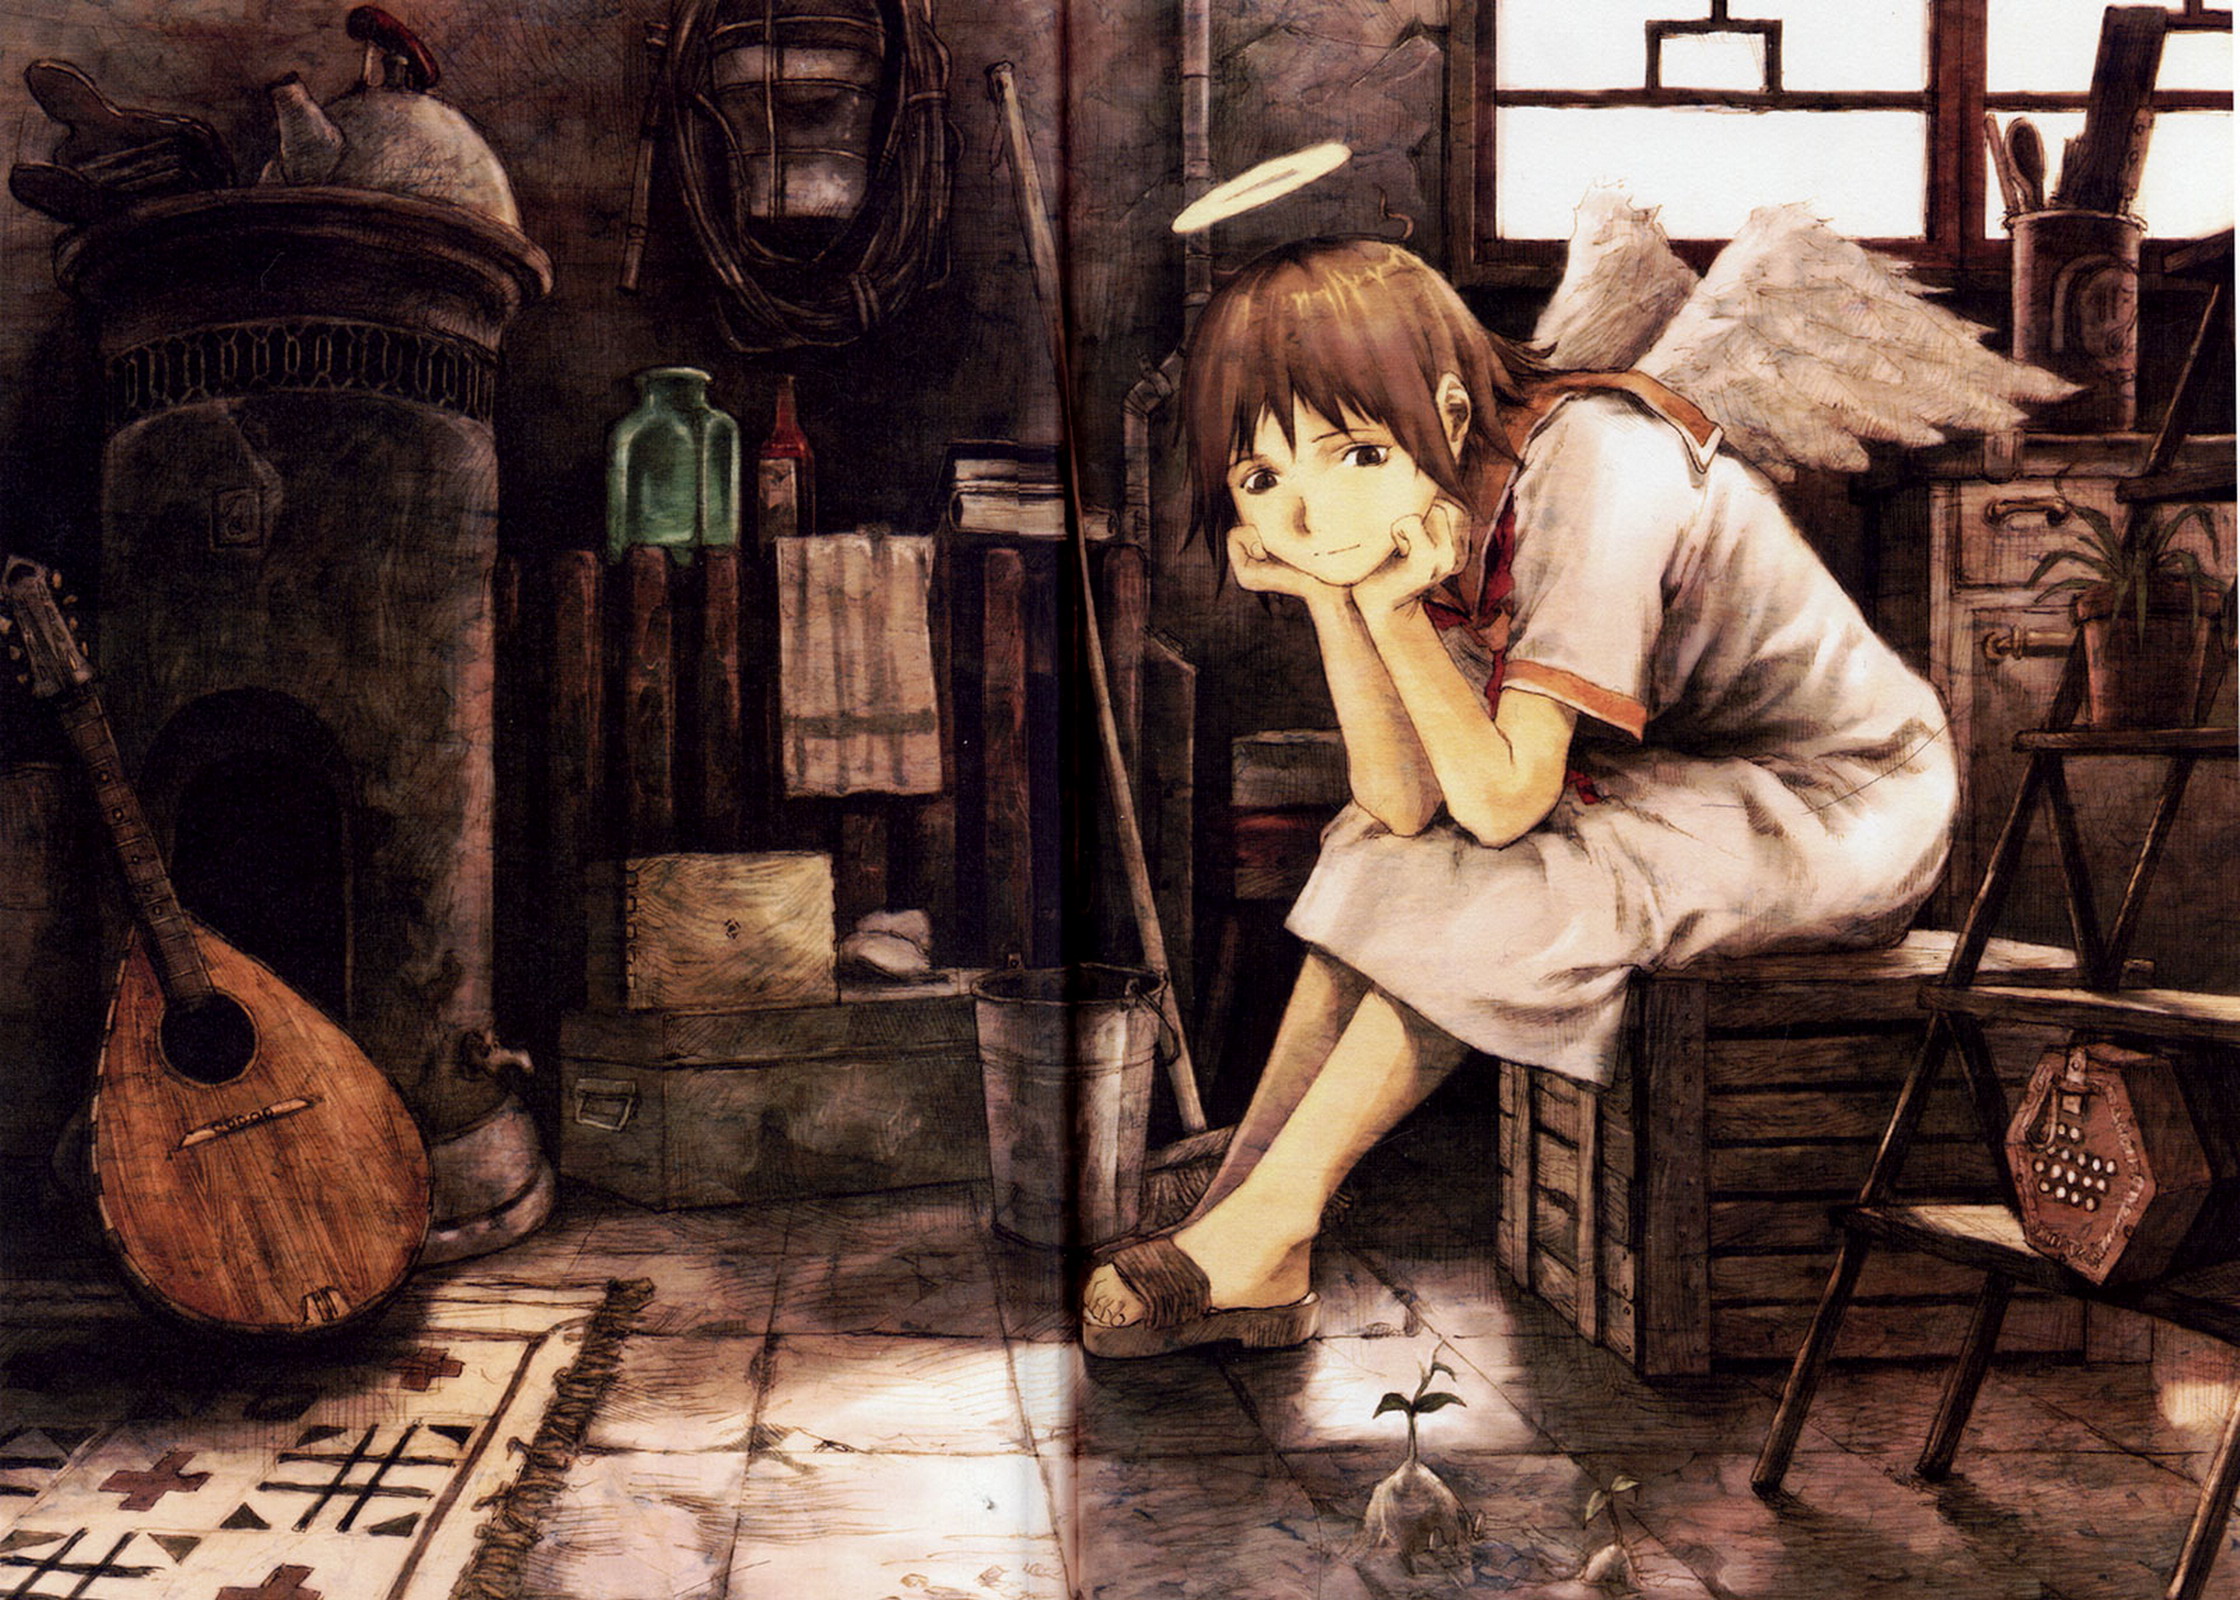 Haibane Renmei Backgrounds, Compatible - PC, Mobile, Gadgets| 2240x1600 px